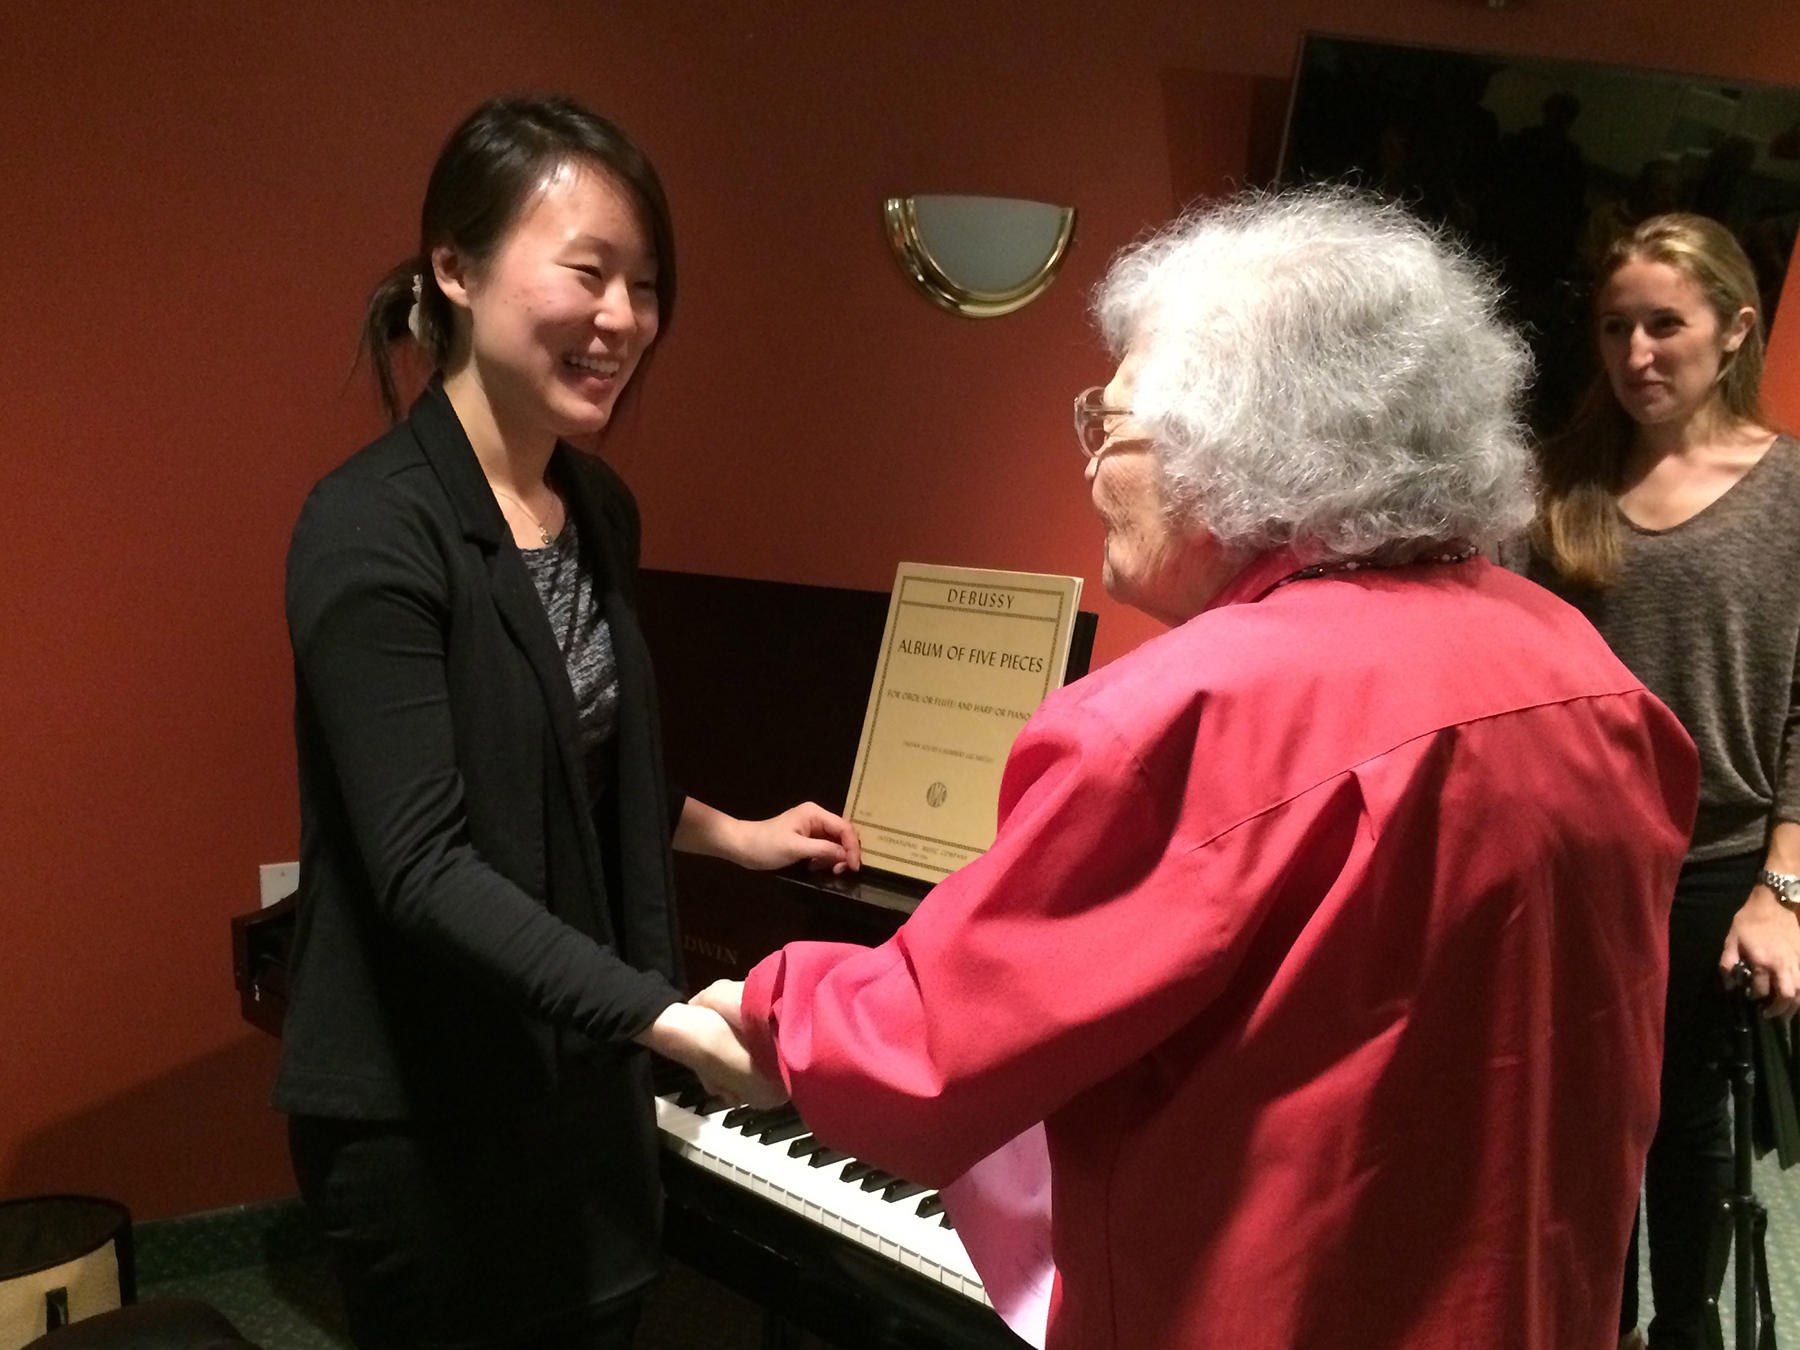 Pianist shakes hands with a senior citizen